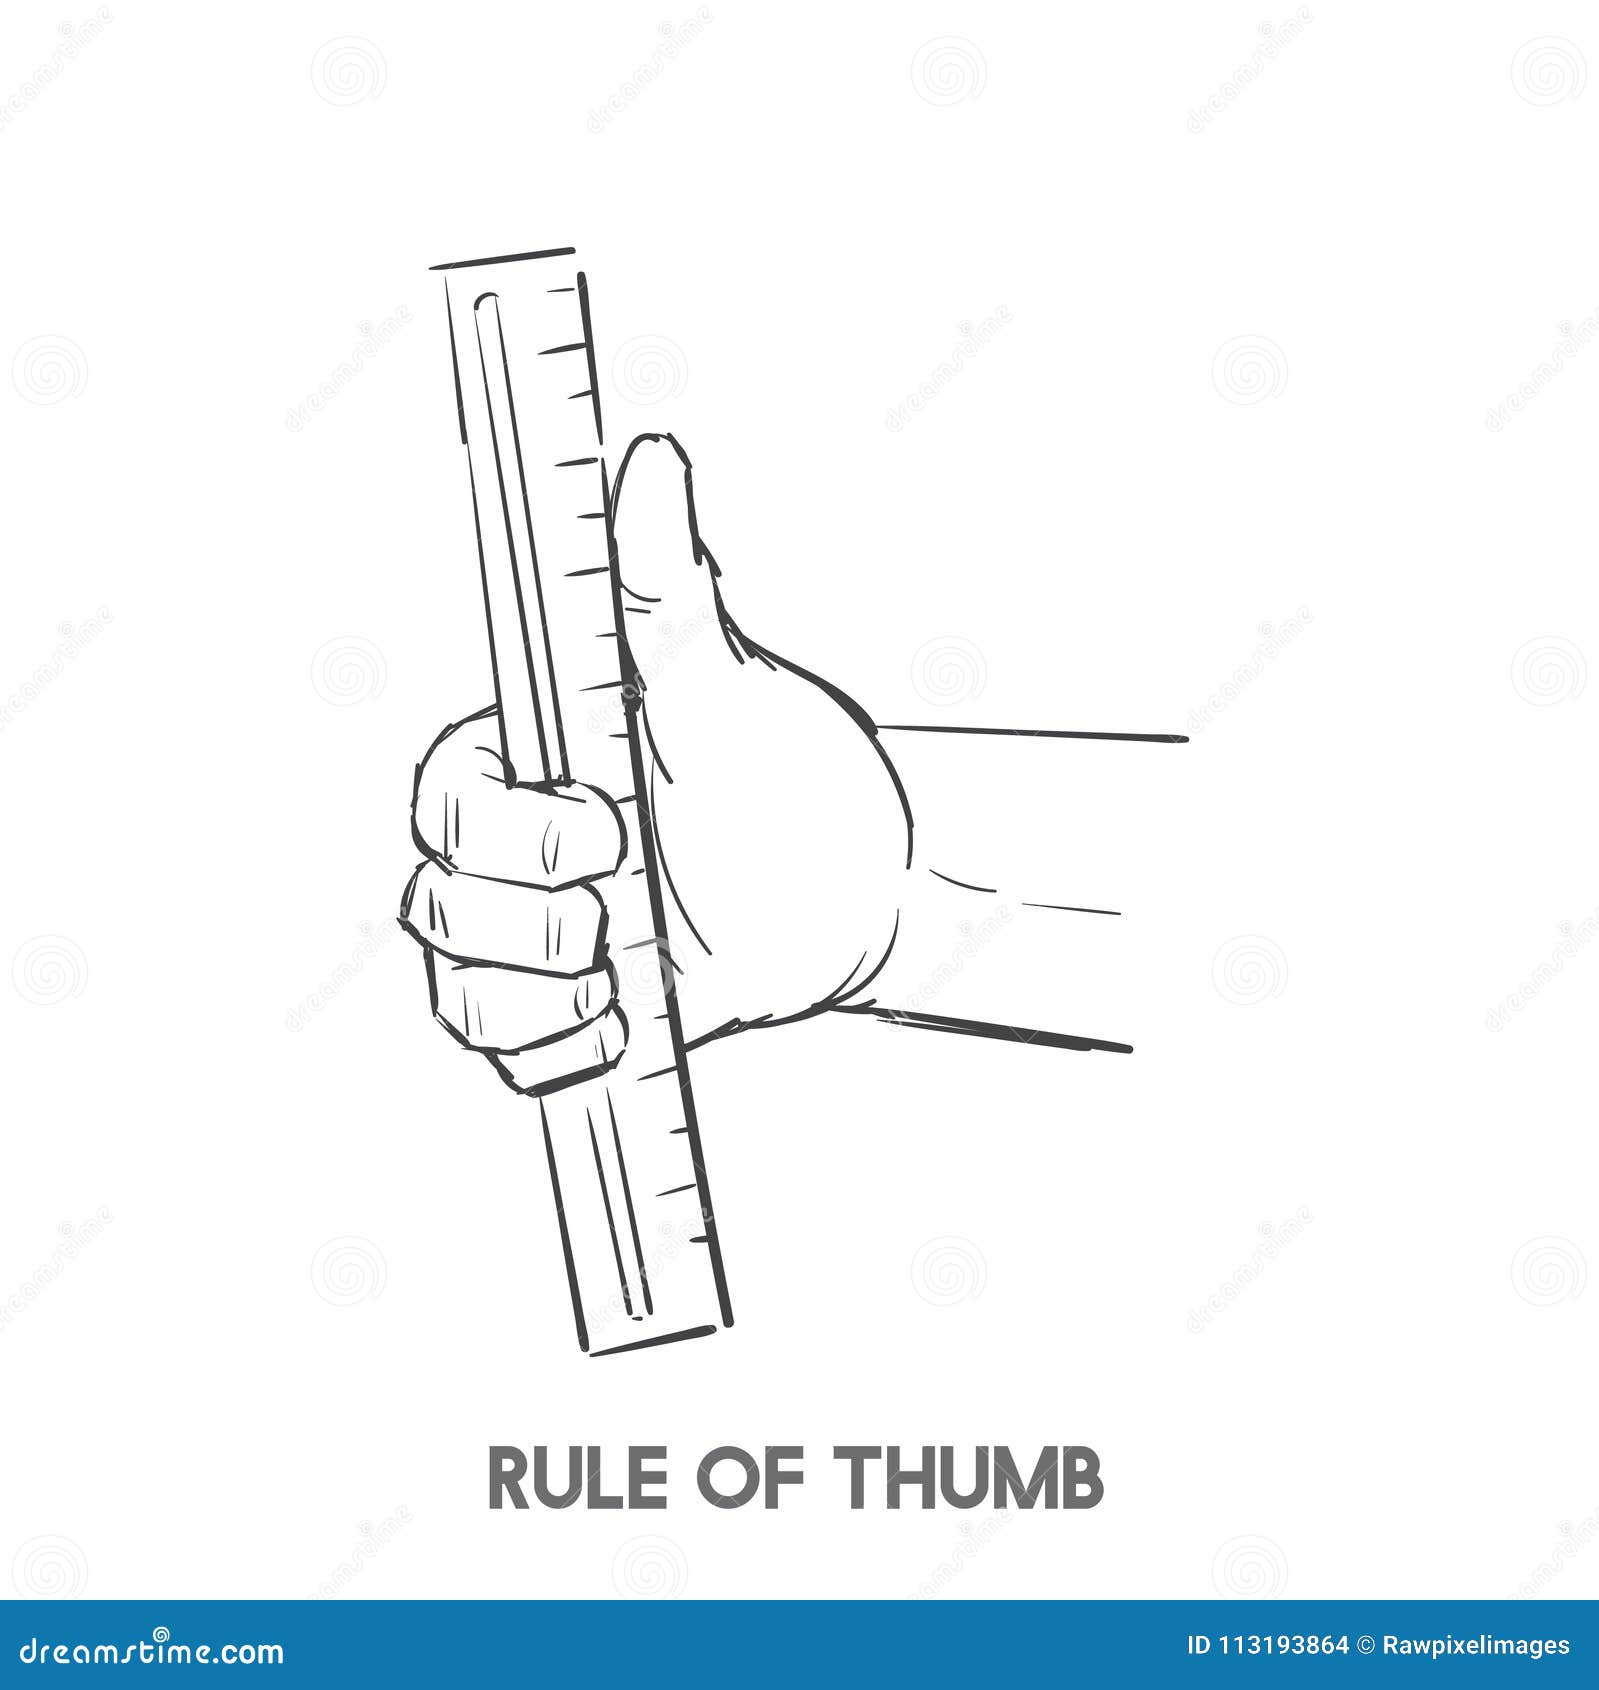 drawing of the rule of thumb